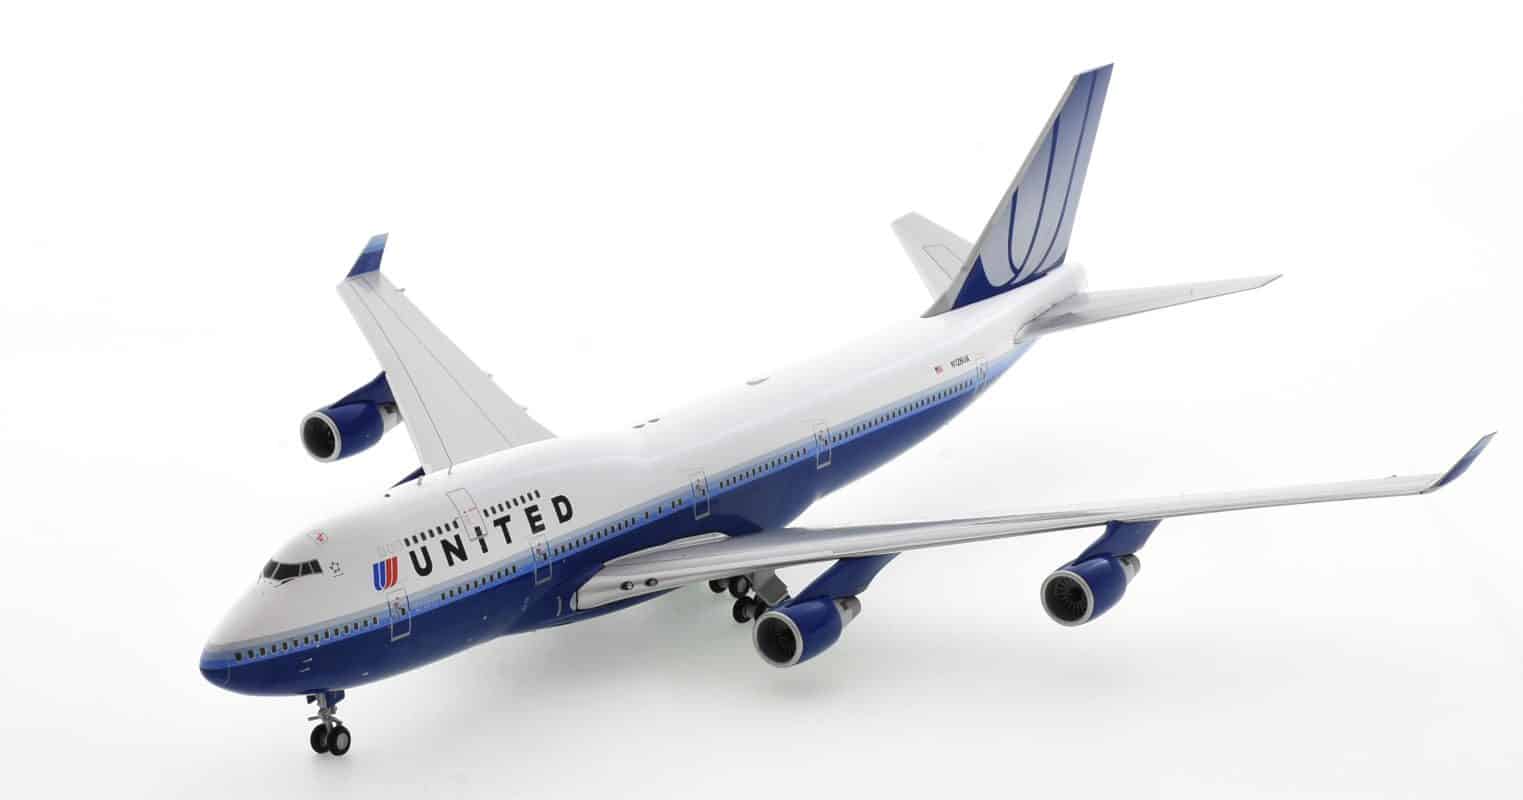 Front port side view of JC2UAL267 / XX2267 - 1/200 scale diecast model of the Boeing 747-400 of registration N128UA in United Airlines livery, circa the 2000s.